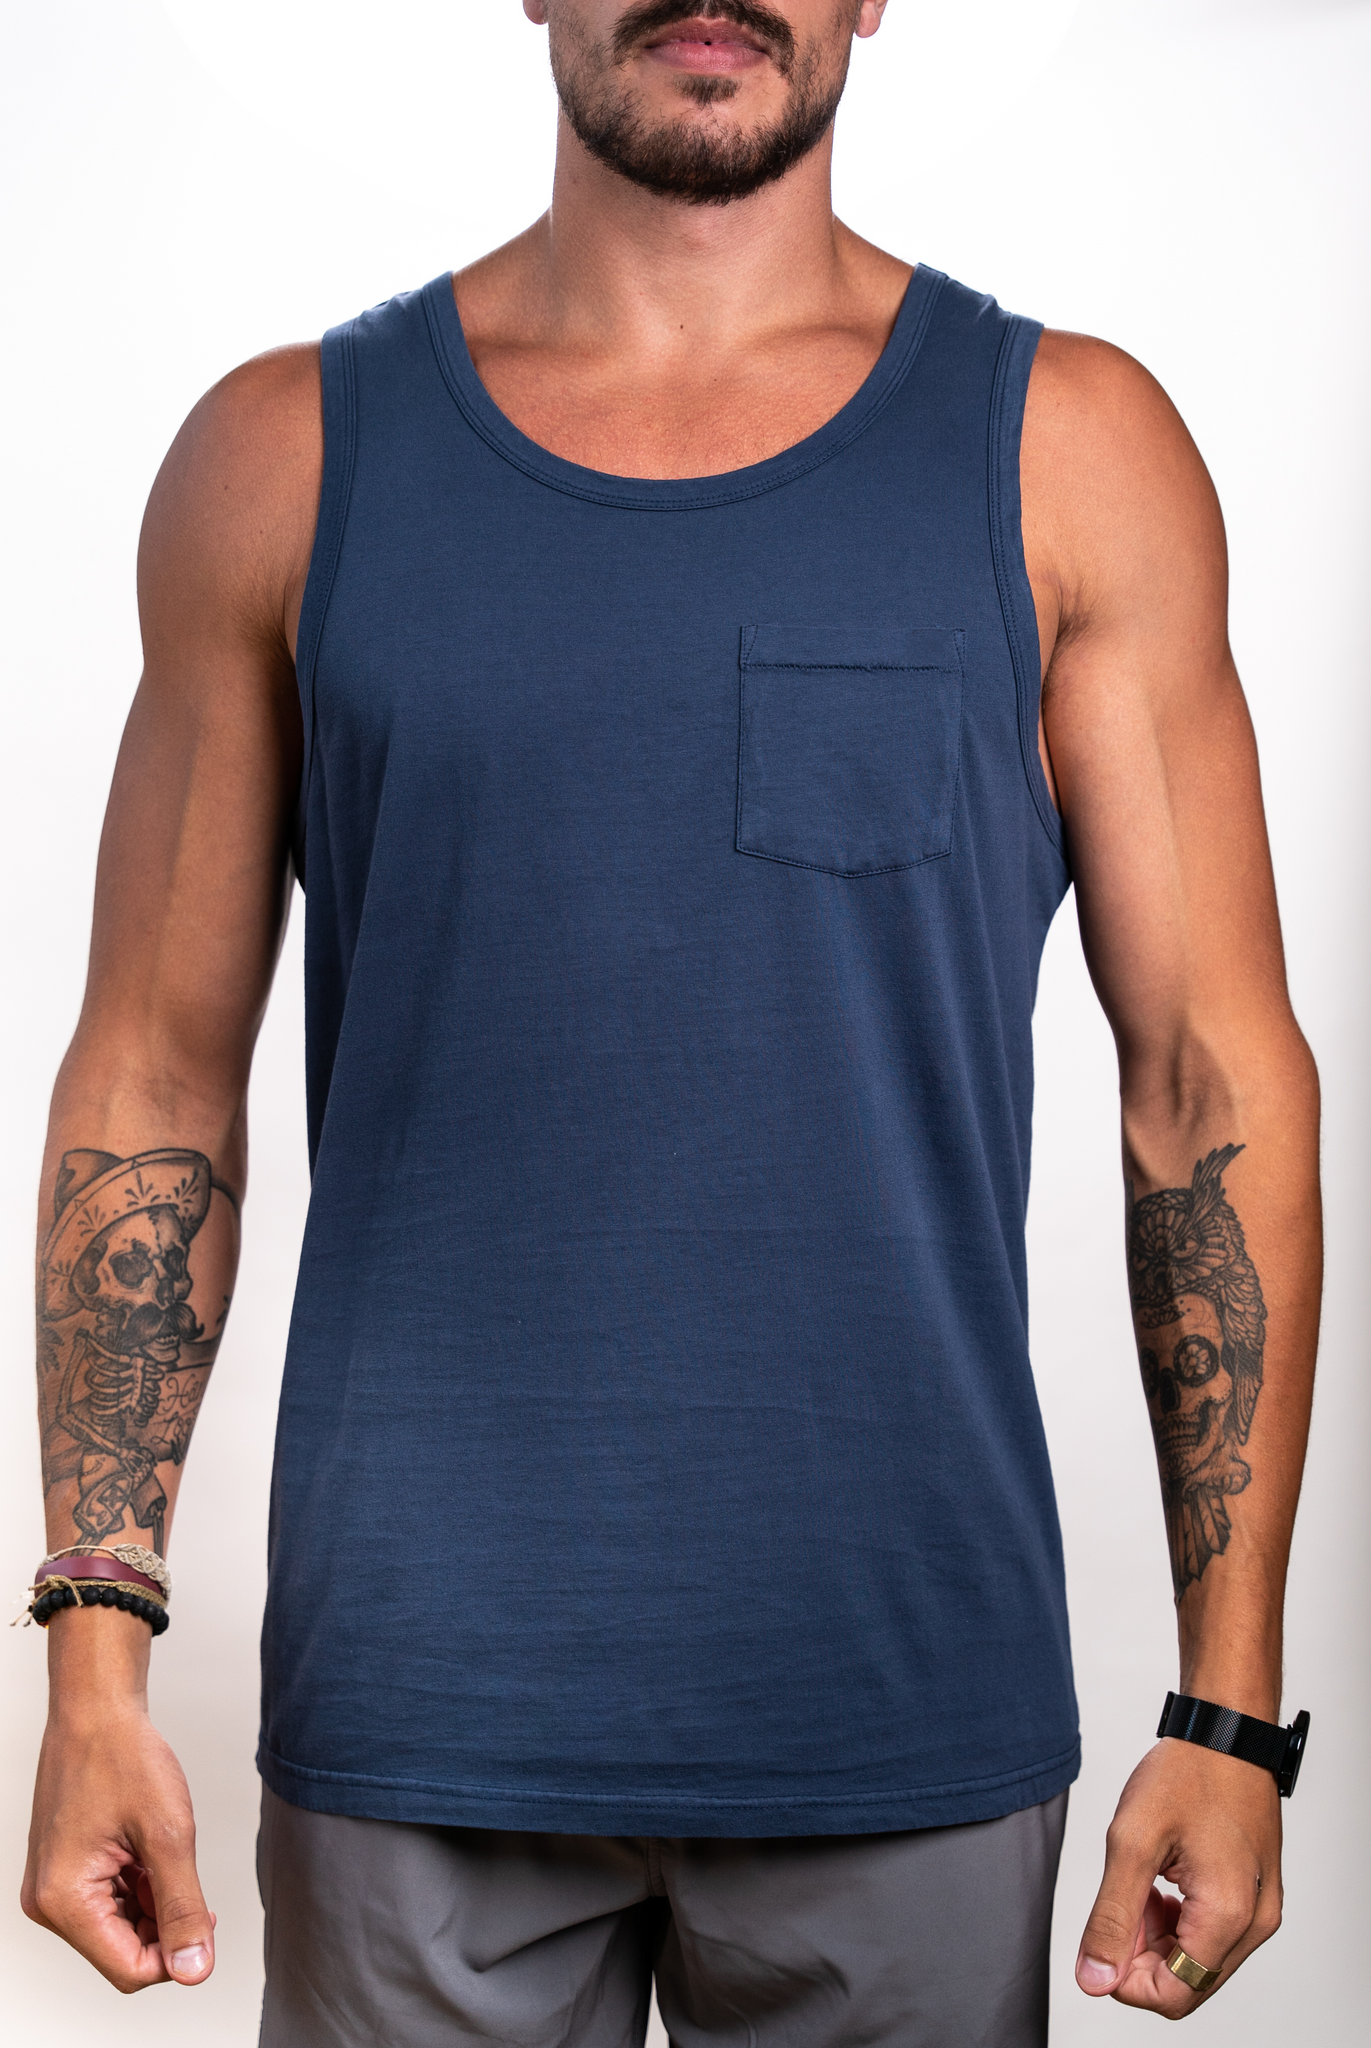 STST21 - Pigment Dyed Tanks Navy / S